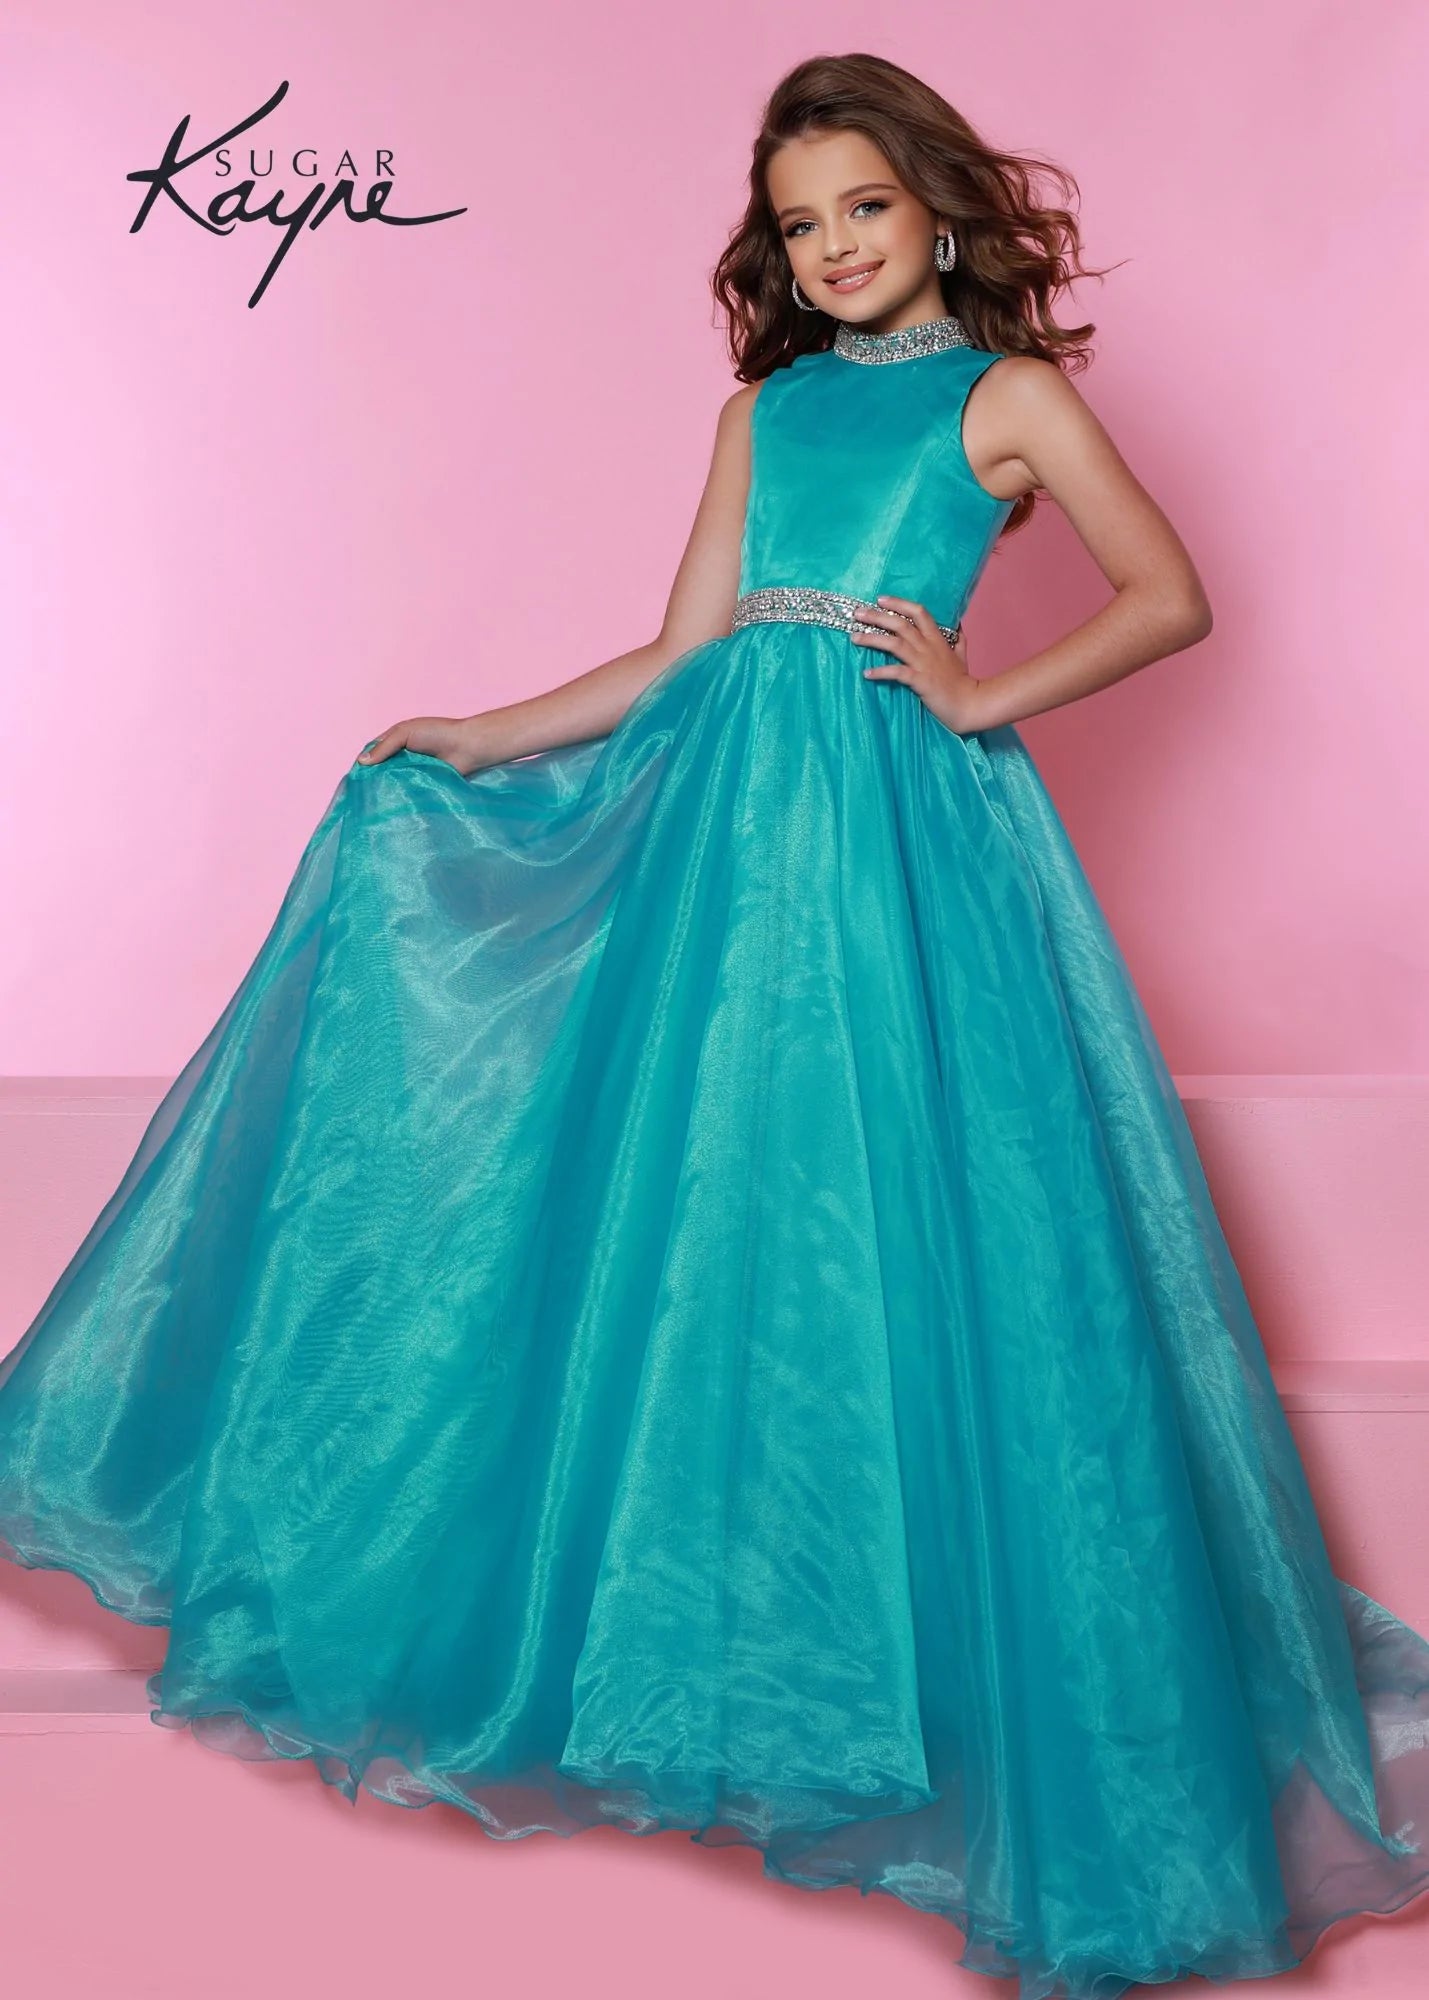 Sugar Kayne C305 Size 8, 12 Barbie Pink Ruffled Layers Girls Preteens  Pageant Dress Ball Gown Cape Halter Formal Dress